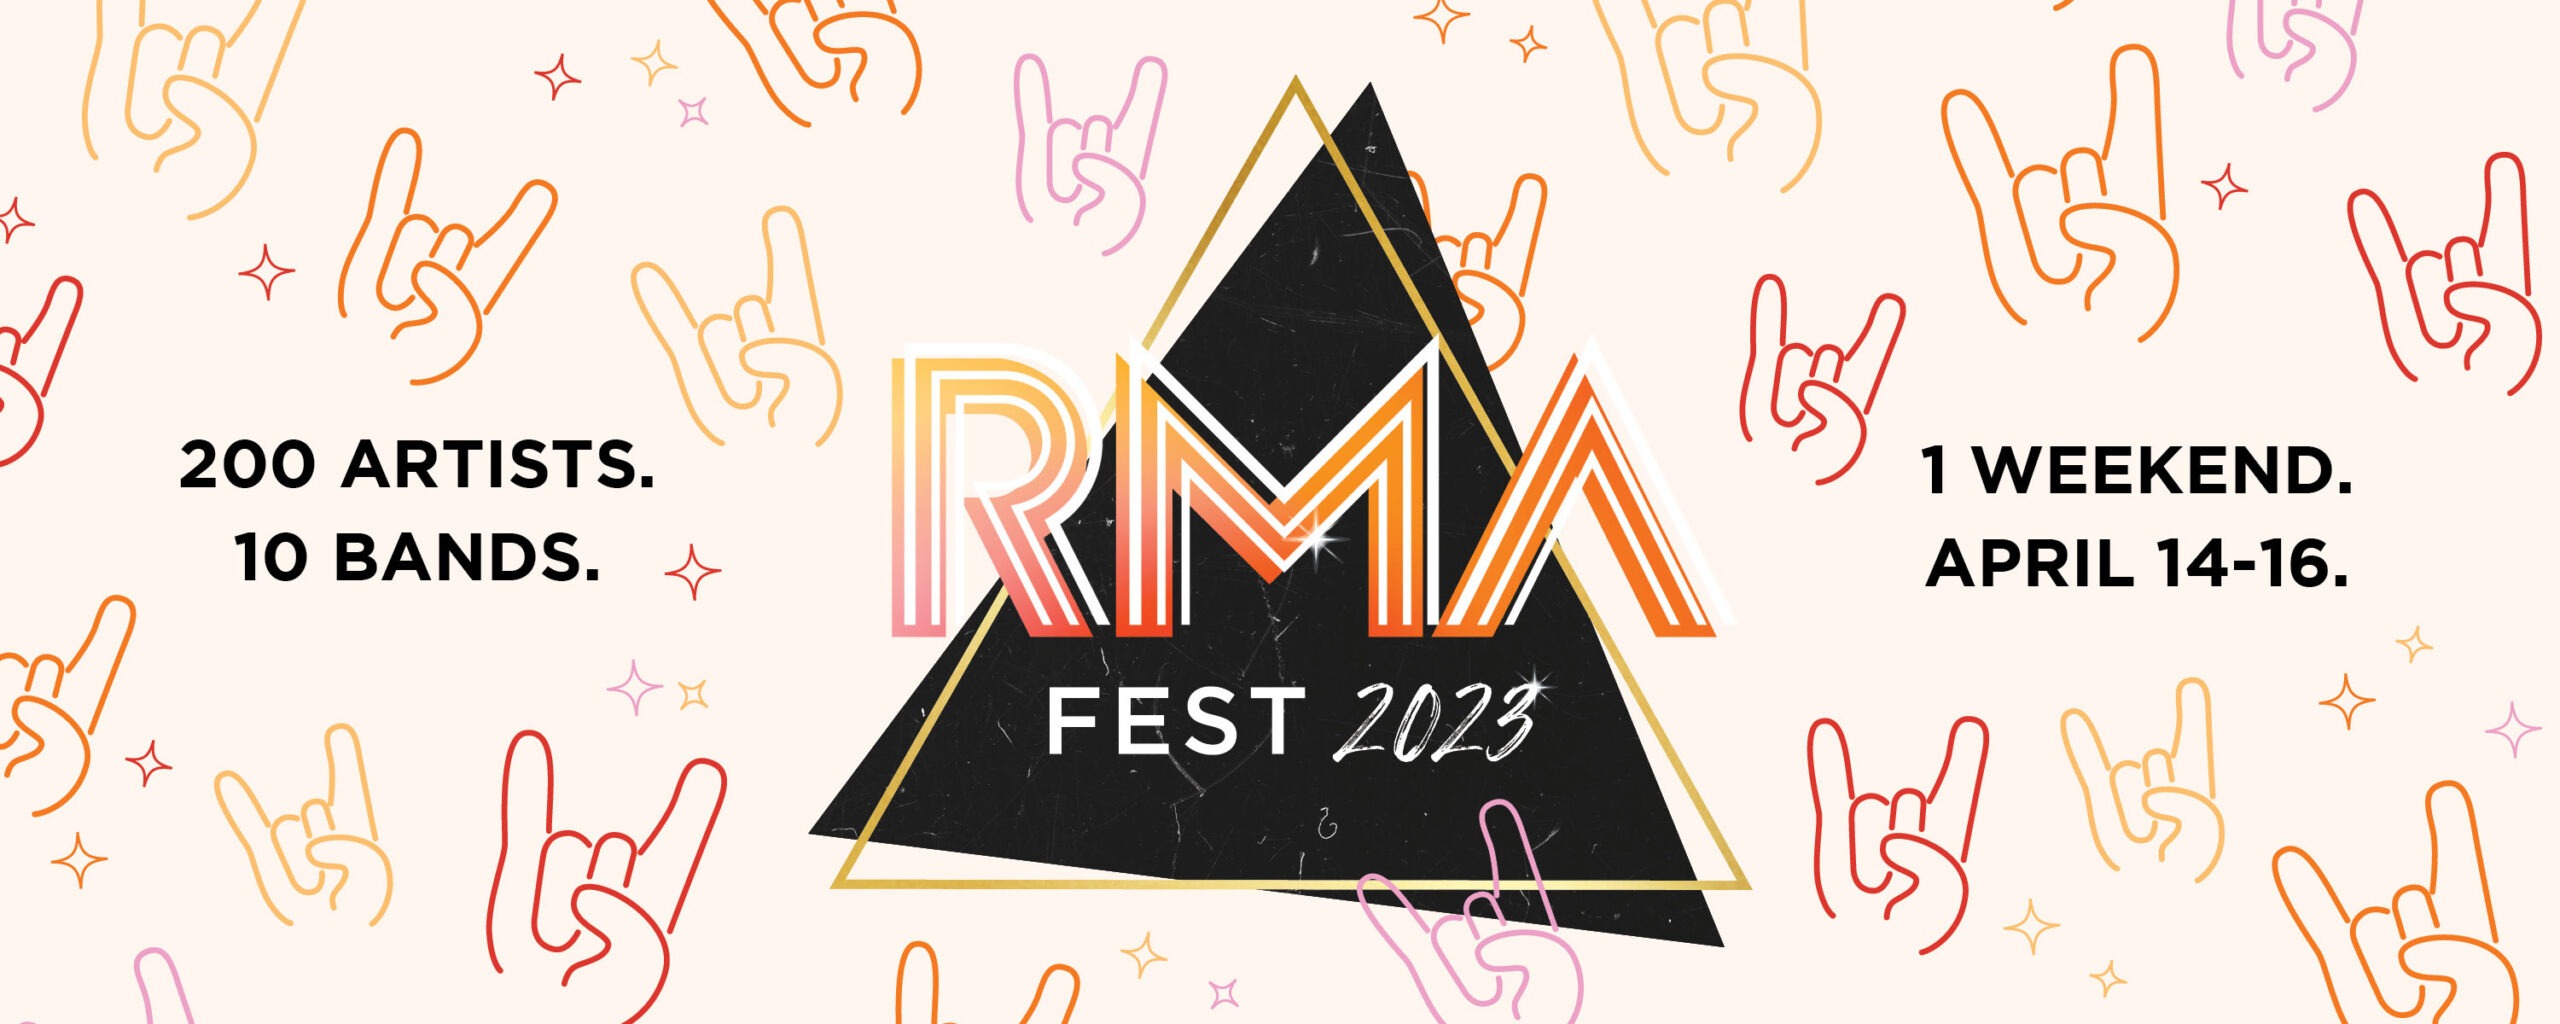 ROOTS Music Hosts a Spectacular RMA Fest 2023: A Weekend of Unforgettable Music Performances!Graphic